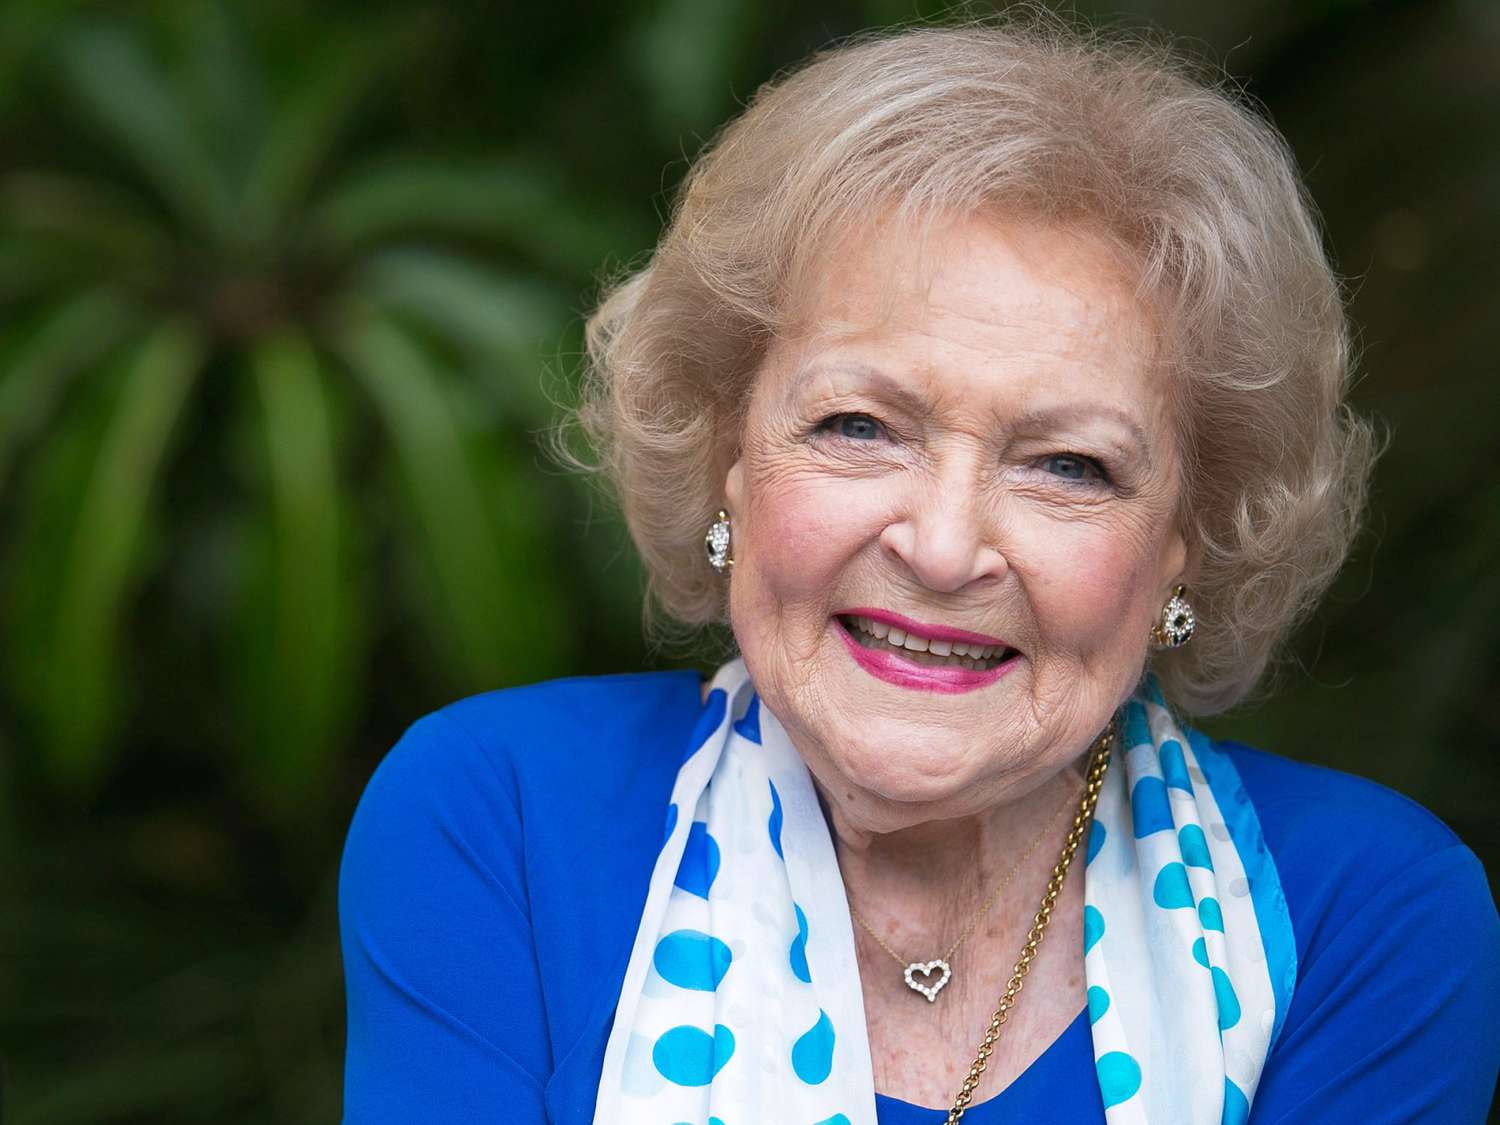 Betty White at the media preview for the Greater Los Angeles Zoo Association's Beastly Ball Fundraiser at Los Angeles Zoo on June 11, 2015